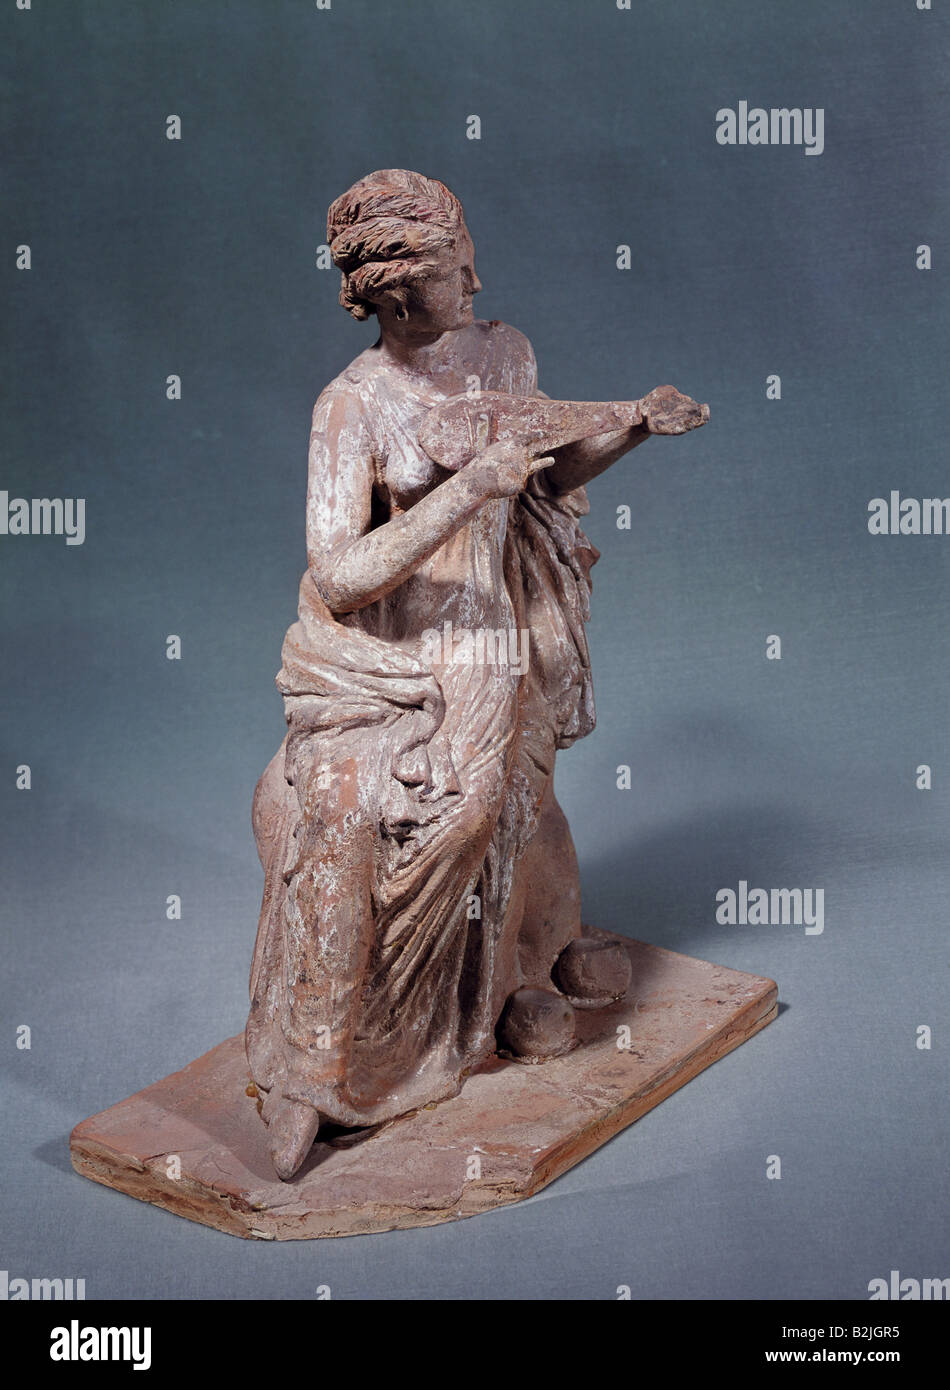 fine arts, ancient world, Greece, girl with lute, terra cotta, Tanagra, 3rd century B.C., Louvre, Paris, Artist's Copyright has not to be cleared Stock Photo